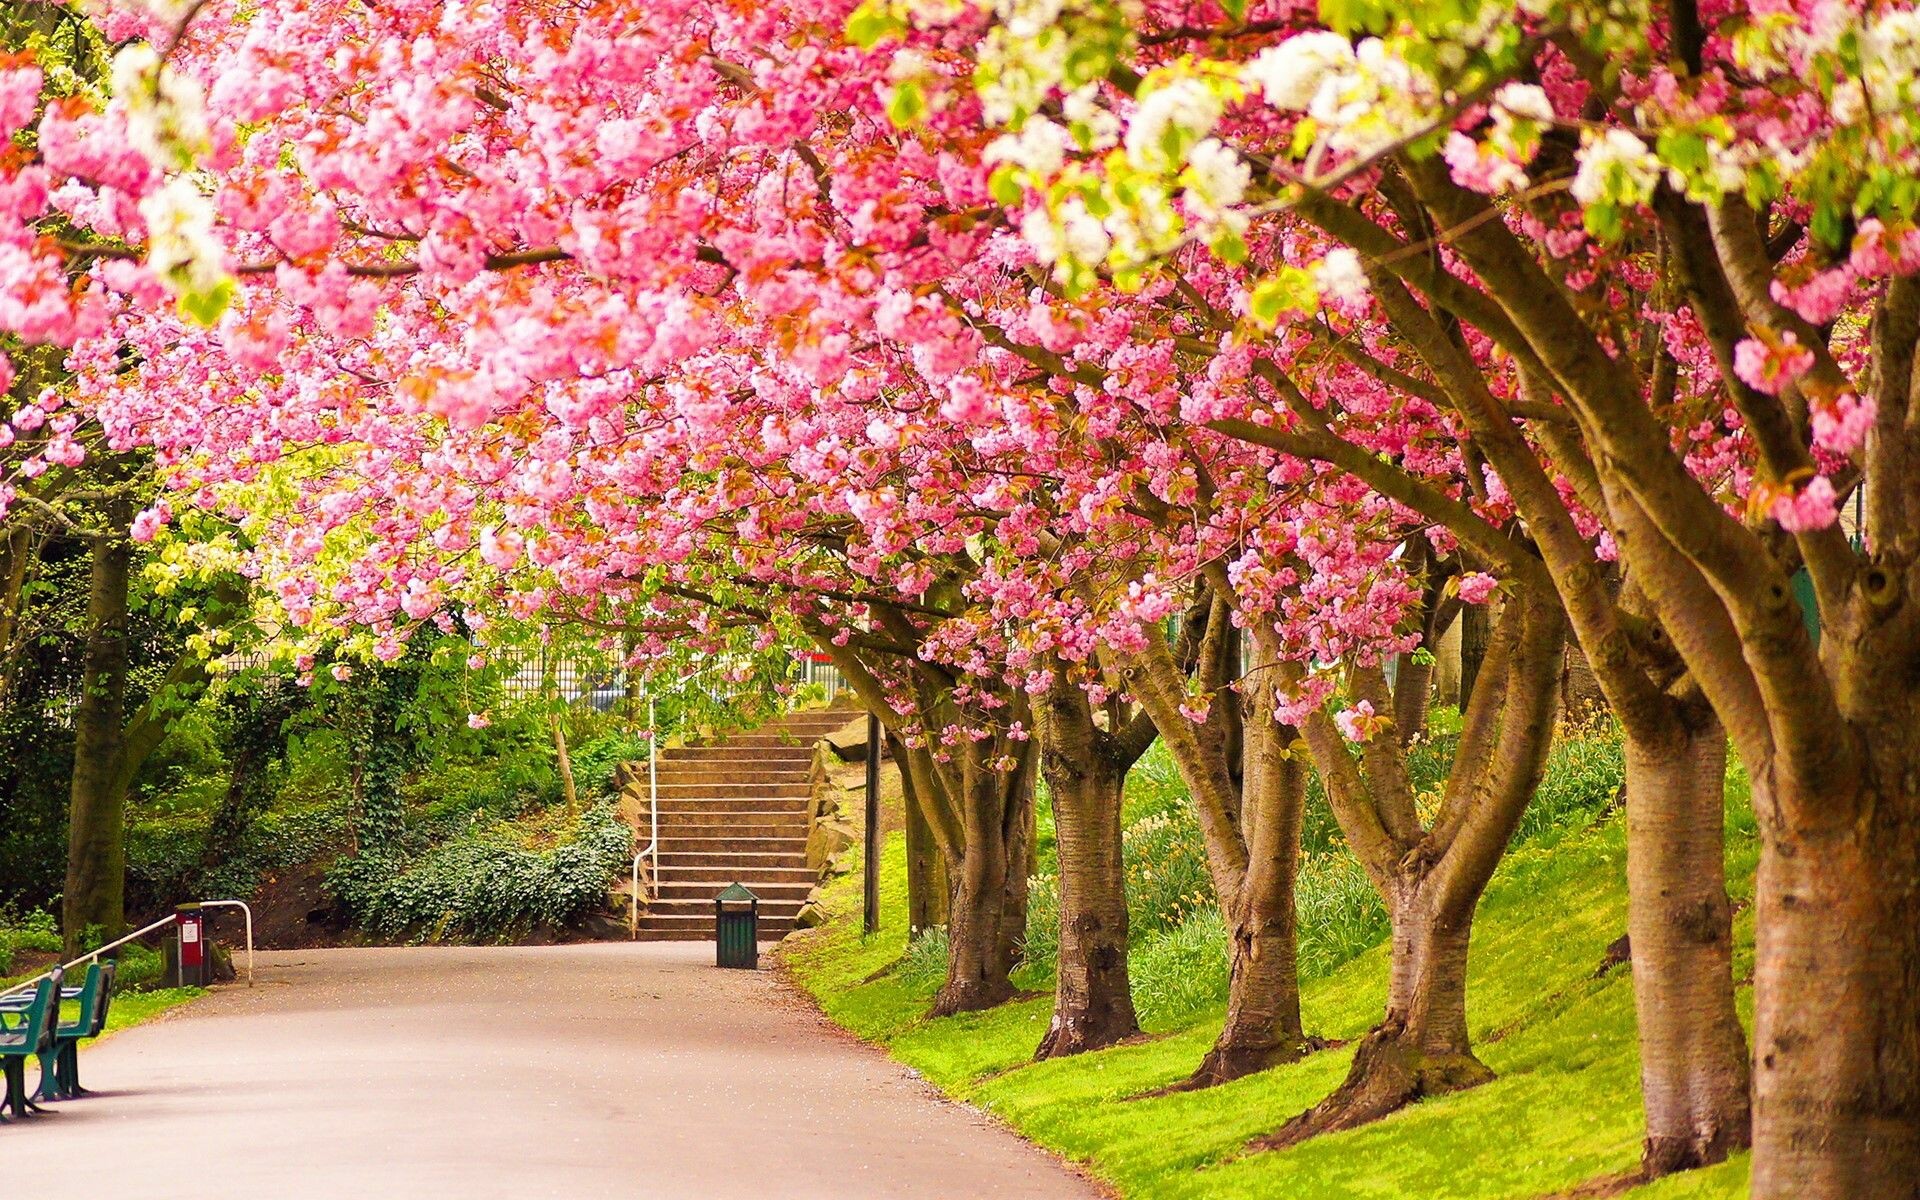 Spring Nature Wallpaper: HD, 4K, 5K for PC and Mobile. Download free image for iPhone, Android